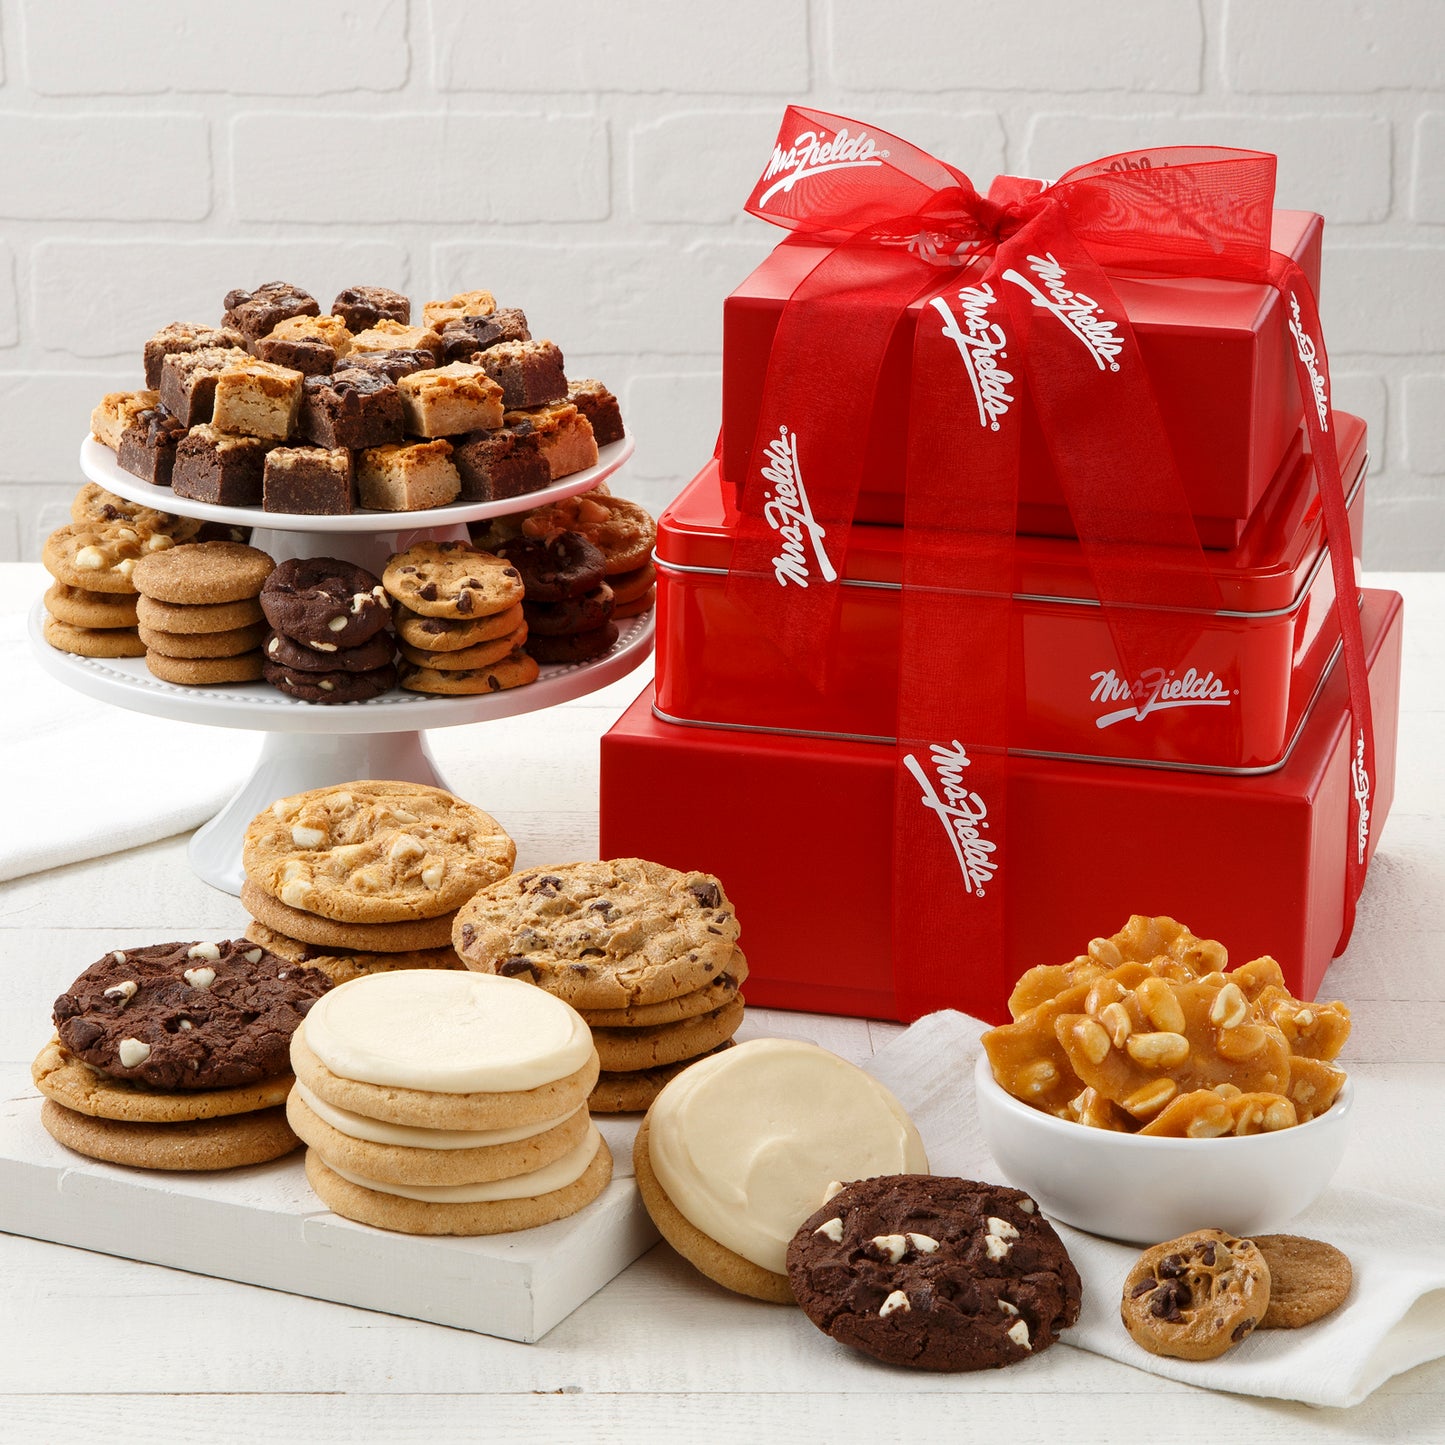 A three tier red tower tied with a Mrs. Fields ribbon and surrounded by an assortment of Nibblers®, original cookies, brownie bites, frosted cookies, and peanut brittle